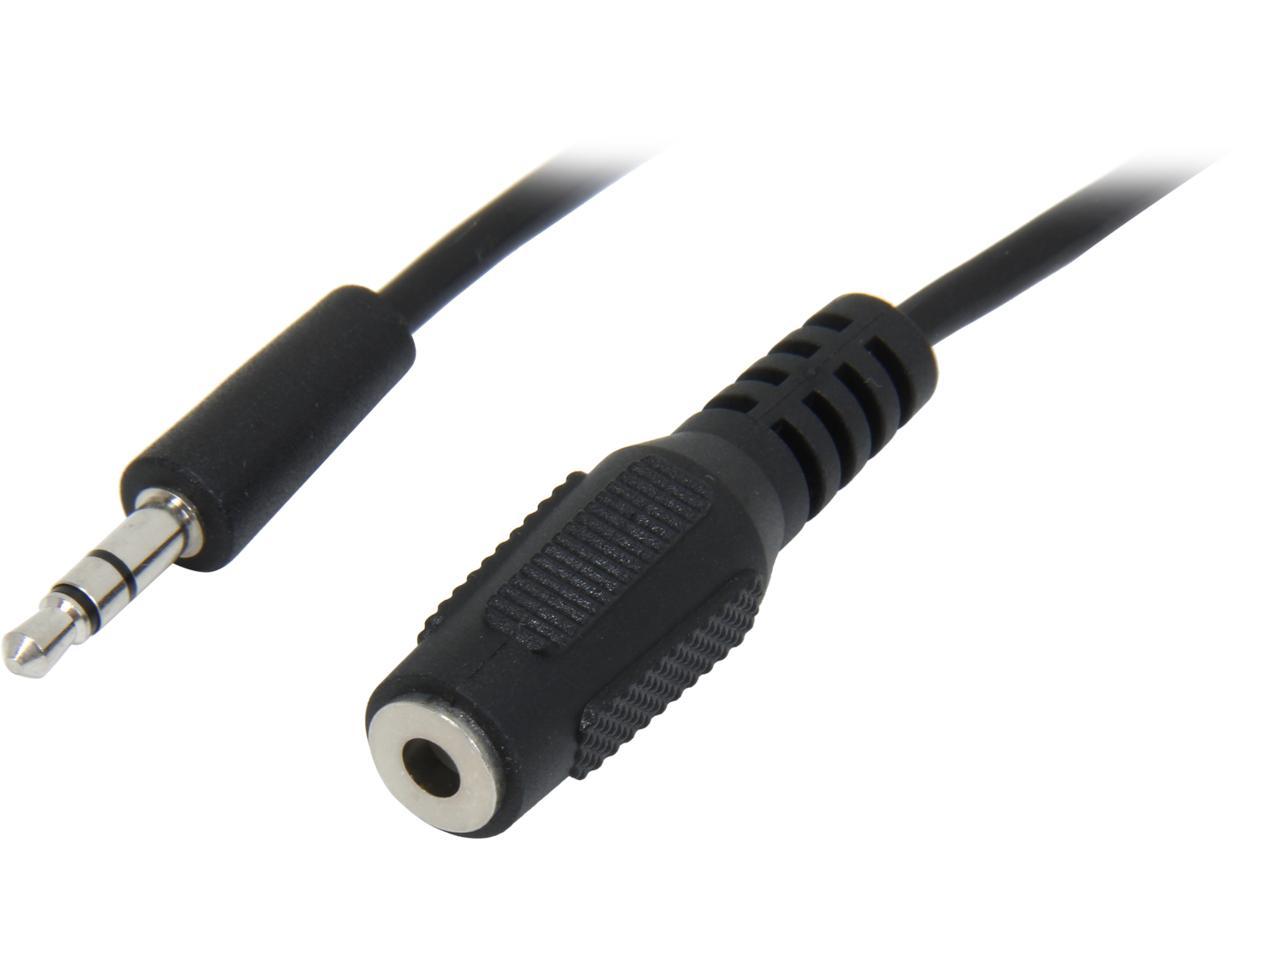 Tripp Lite P311-006 6 ft. Mini-Stereo Audio Extension Cable Male to Female - image 1 of 3